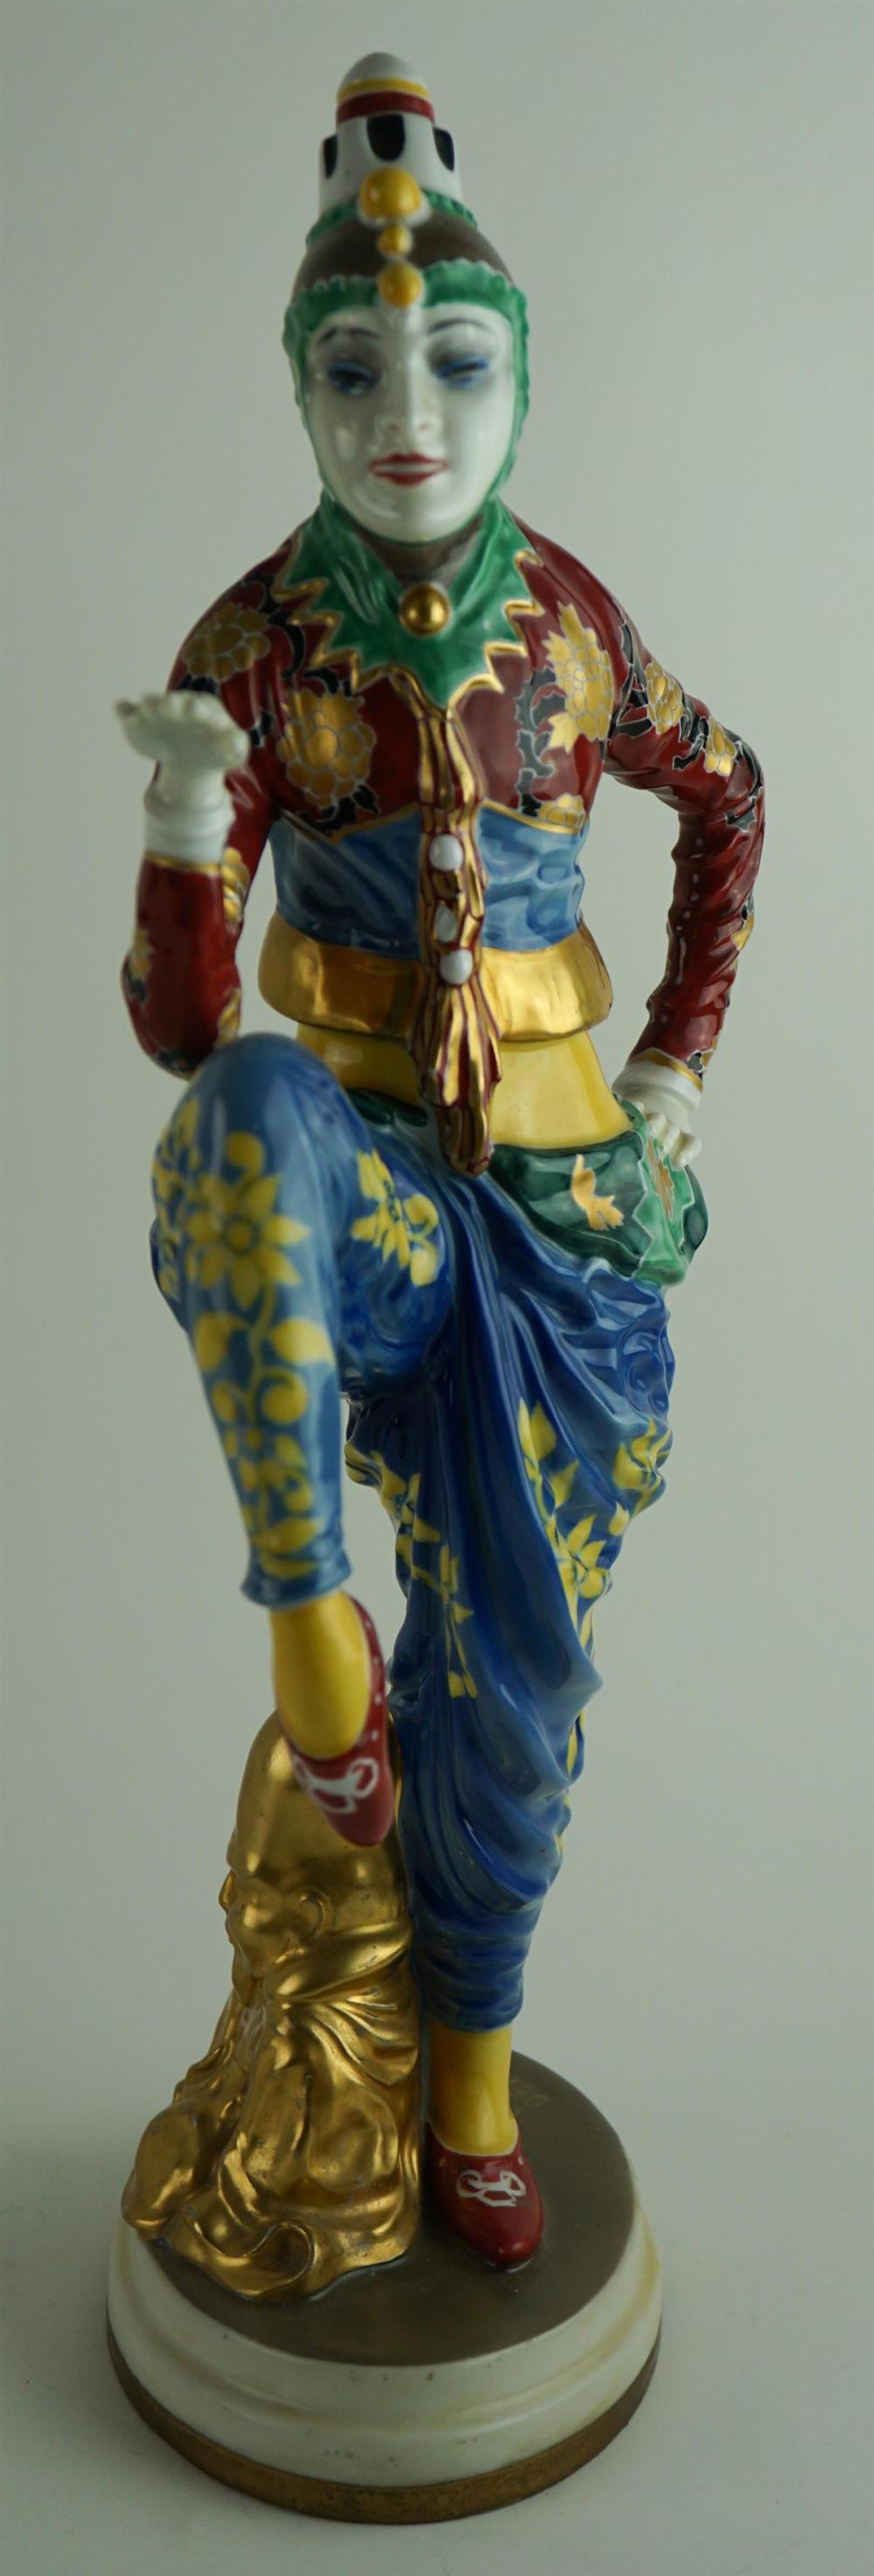 ROSENTHAL PORCELAIN FIGURE FROM AN EXOTIC